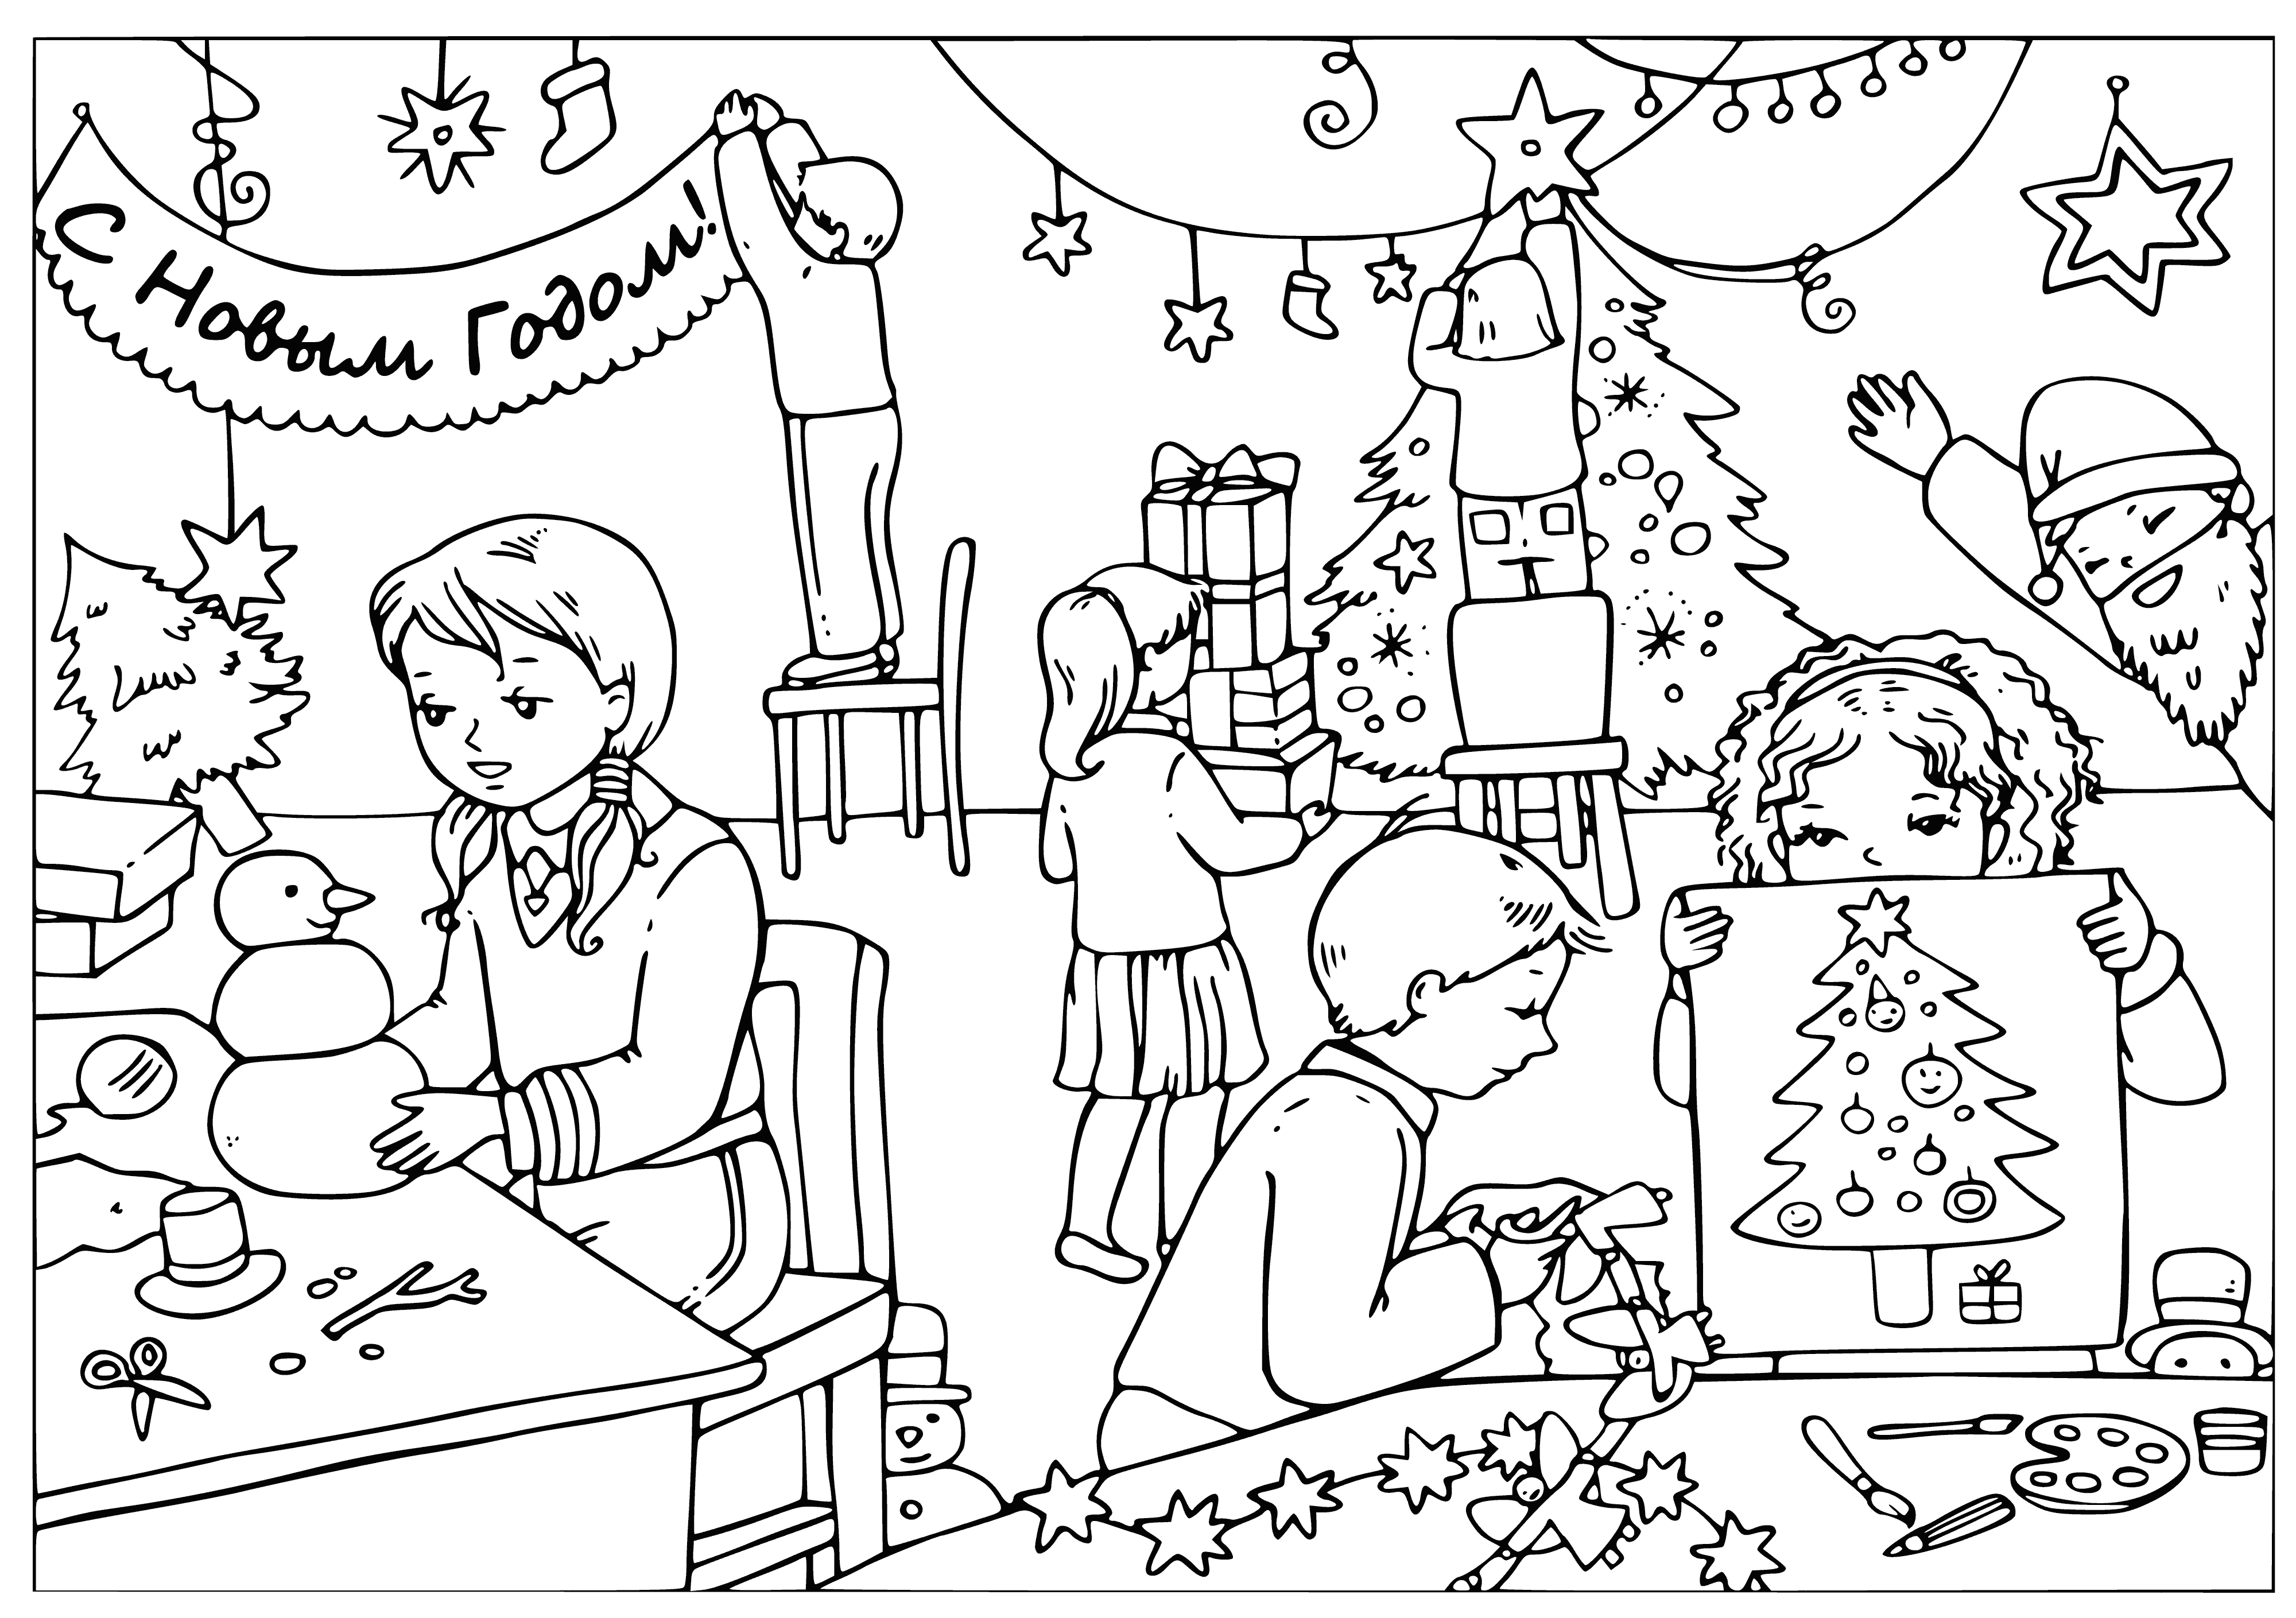 coloring page: Kids are having fun in the snow: making snowmen, sledding, throwing snowballs.